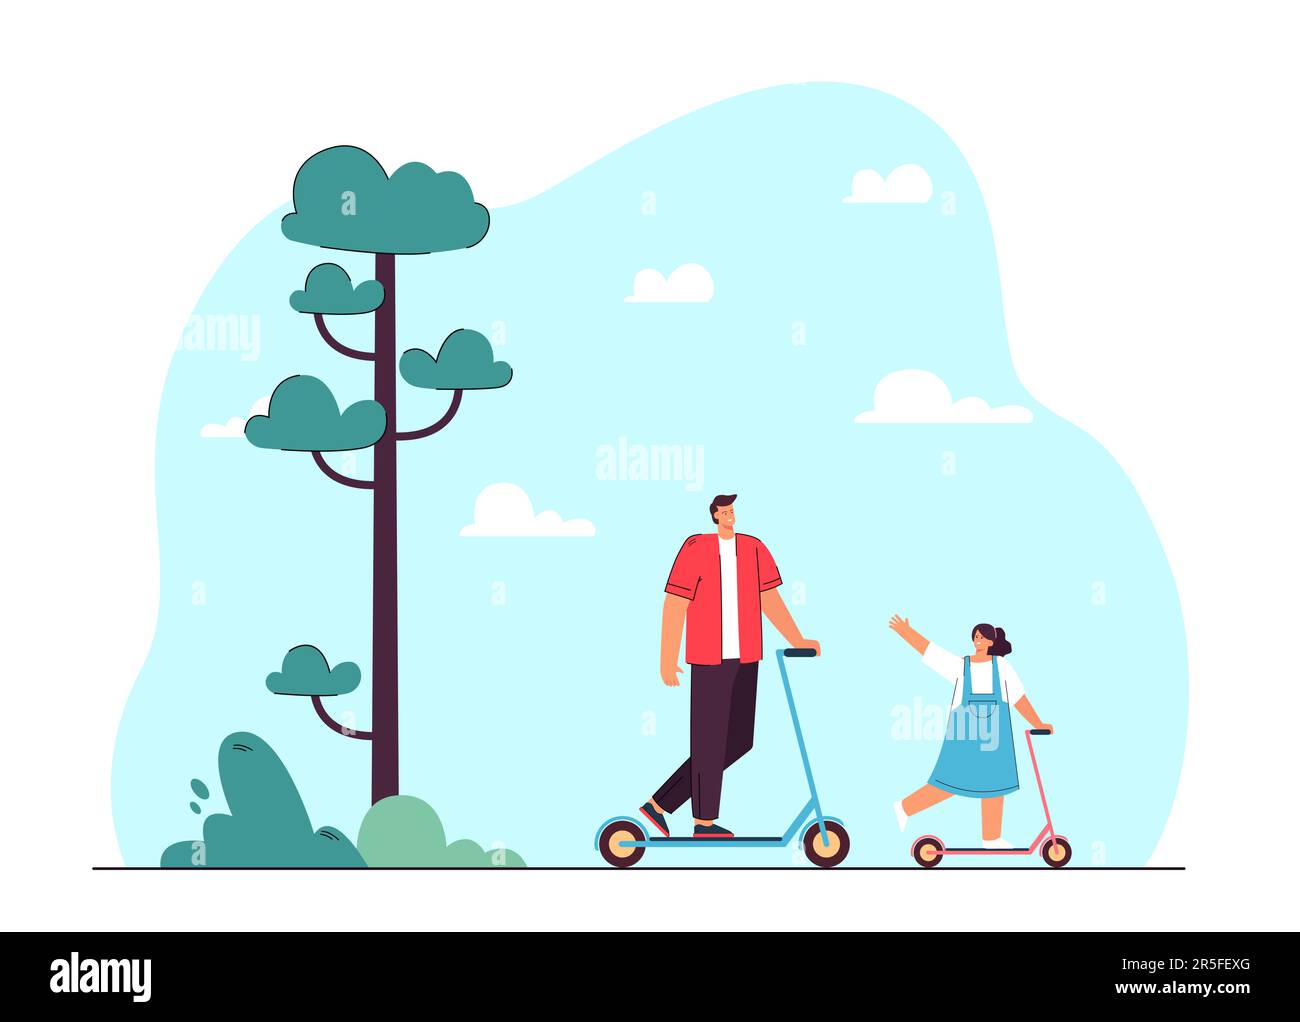 Cartoon man and girl riding scooters Stock Vector